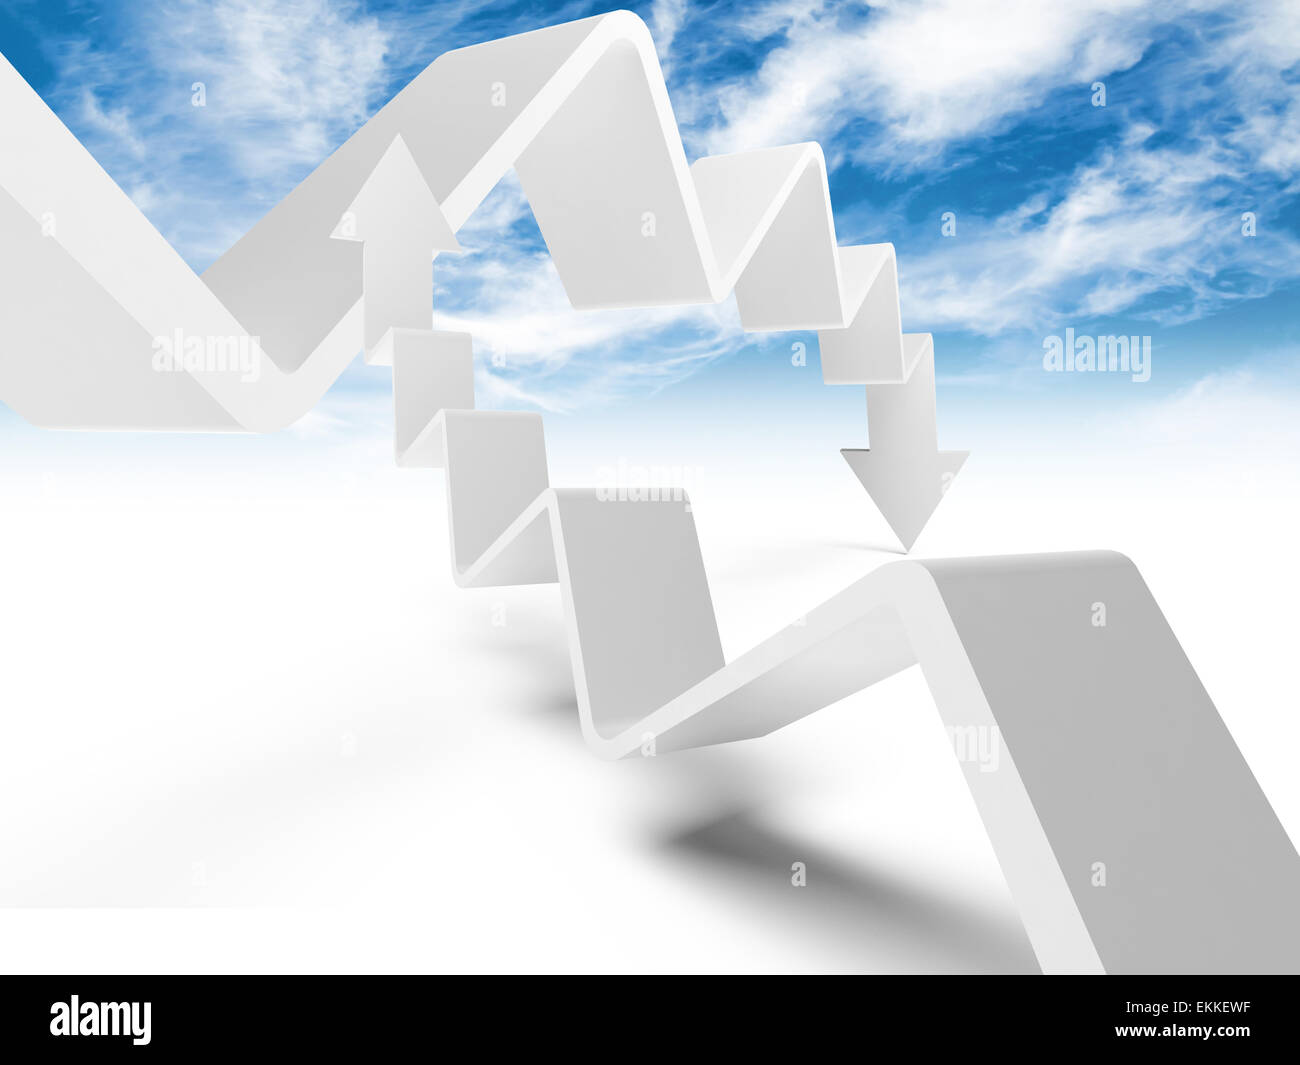 Two broken trend lines with arrows are going up and down, 3d illustration with cloudy sky photo background Stock Photo